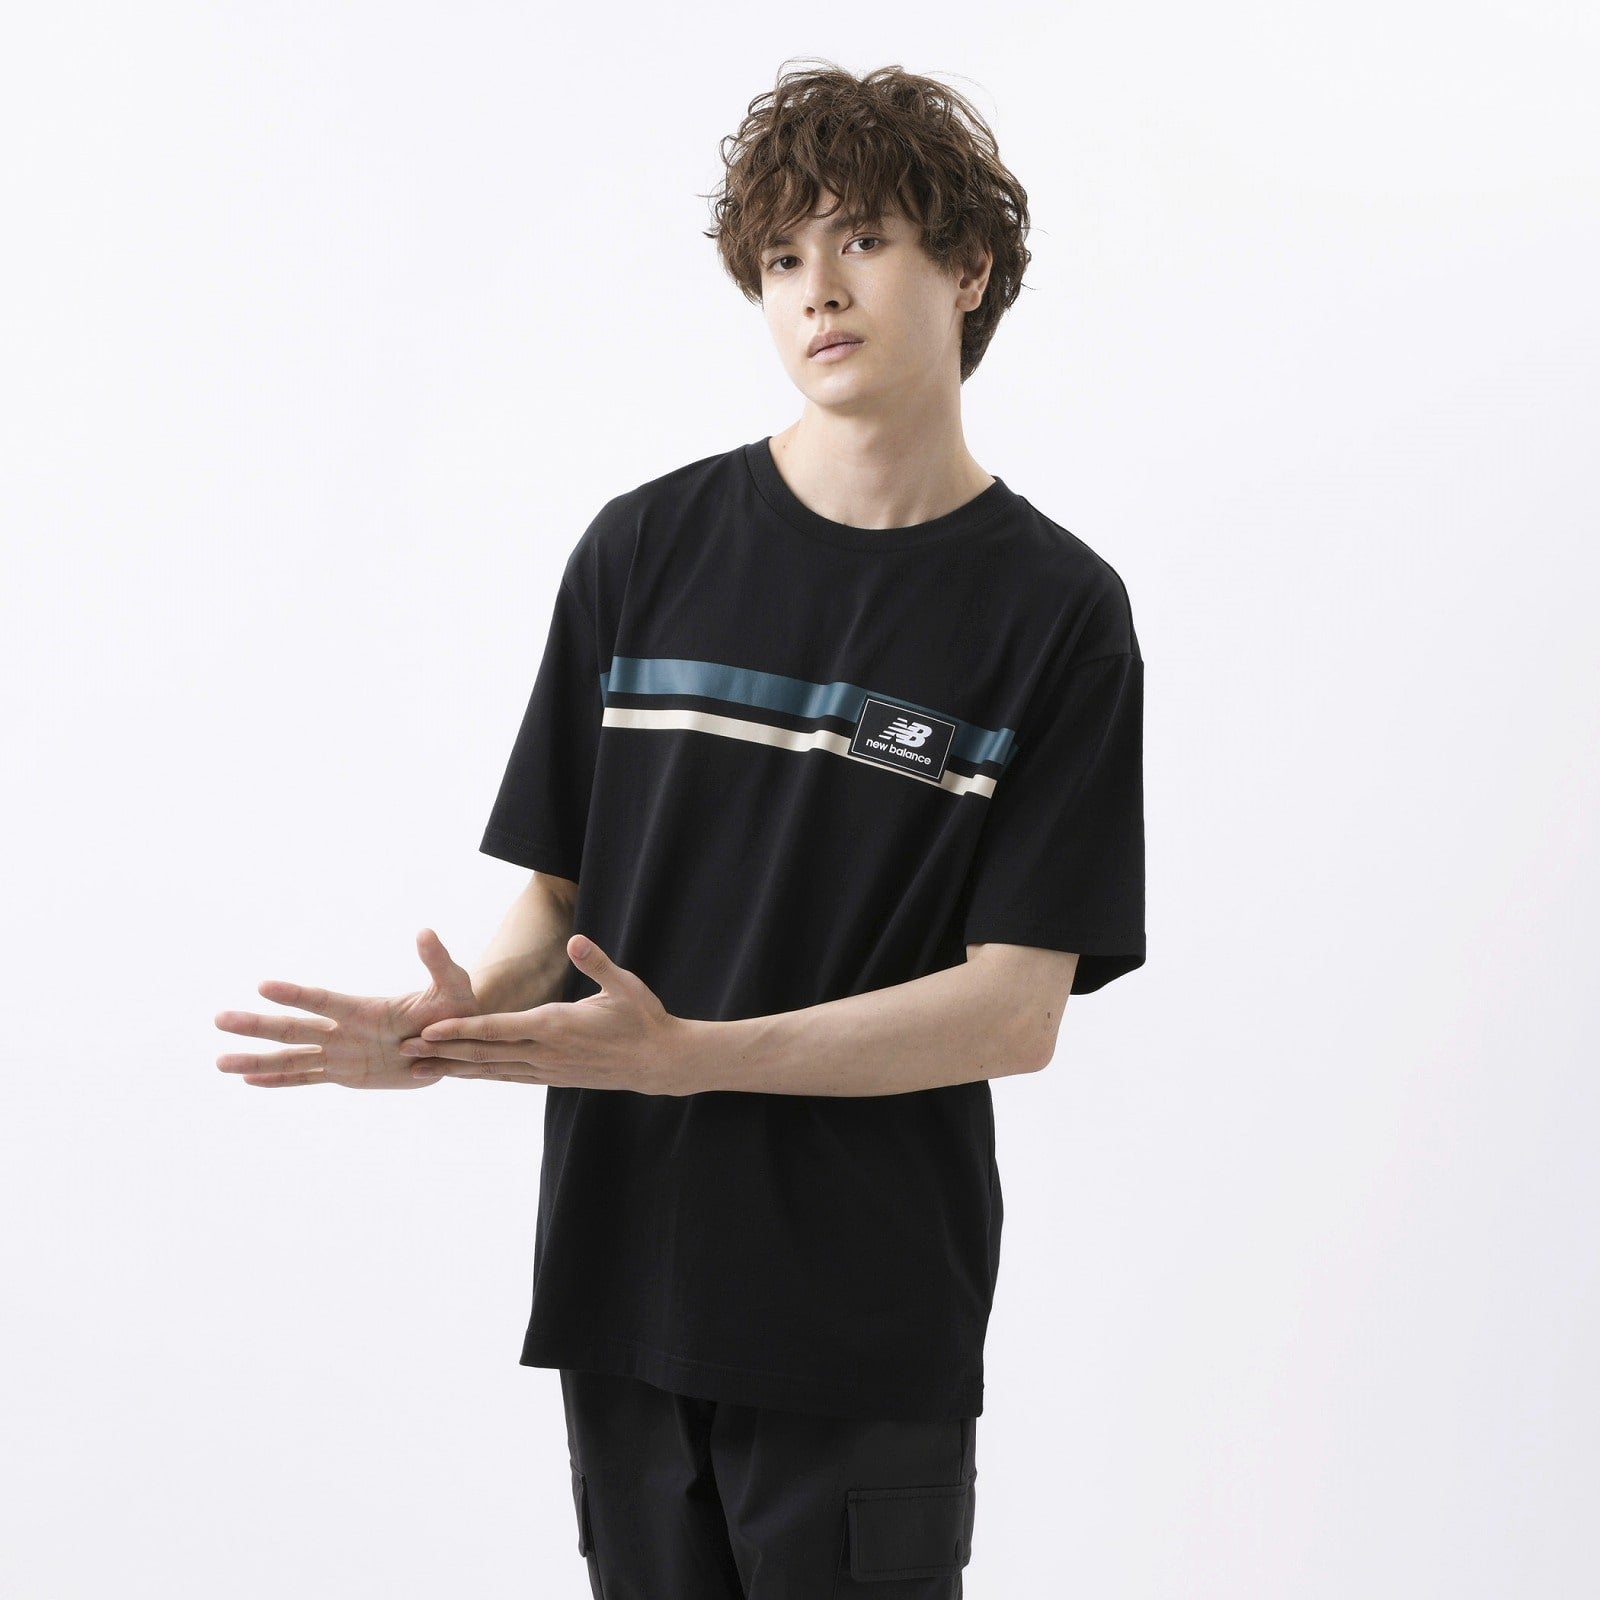 NB Athletics Higher Learning  Tシャツ